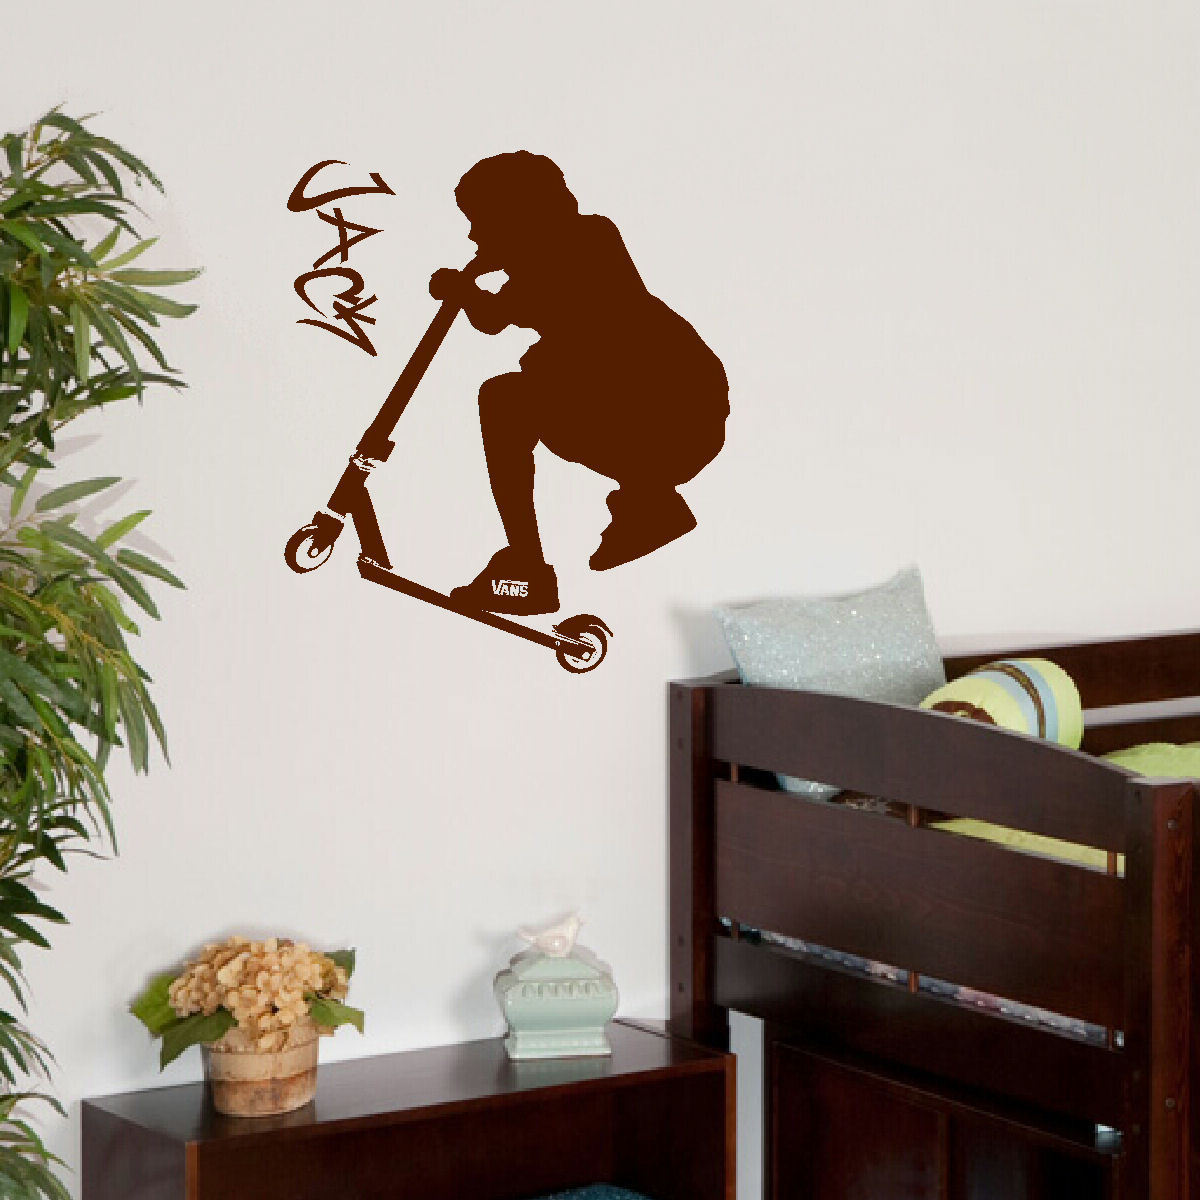 EXTRA LARGE PERSONALISED STUNT TRICK SCOOTER CHILD BEDROOM WALL STICKER DECAL 